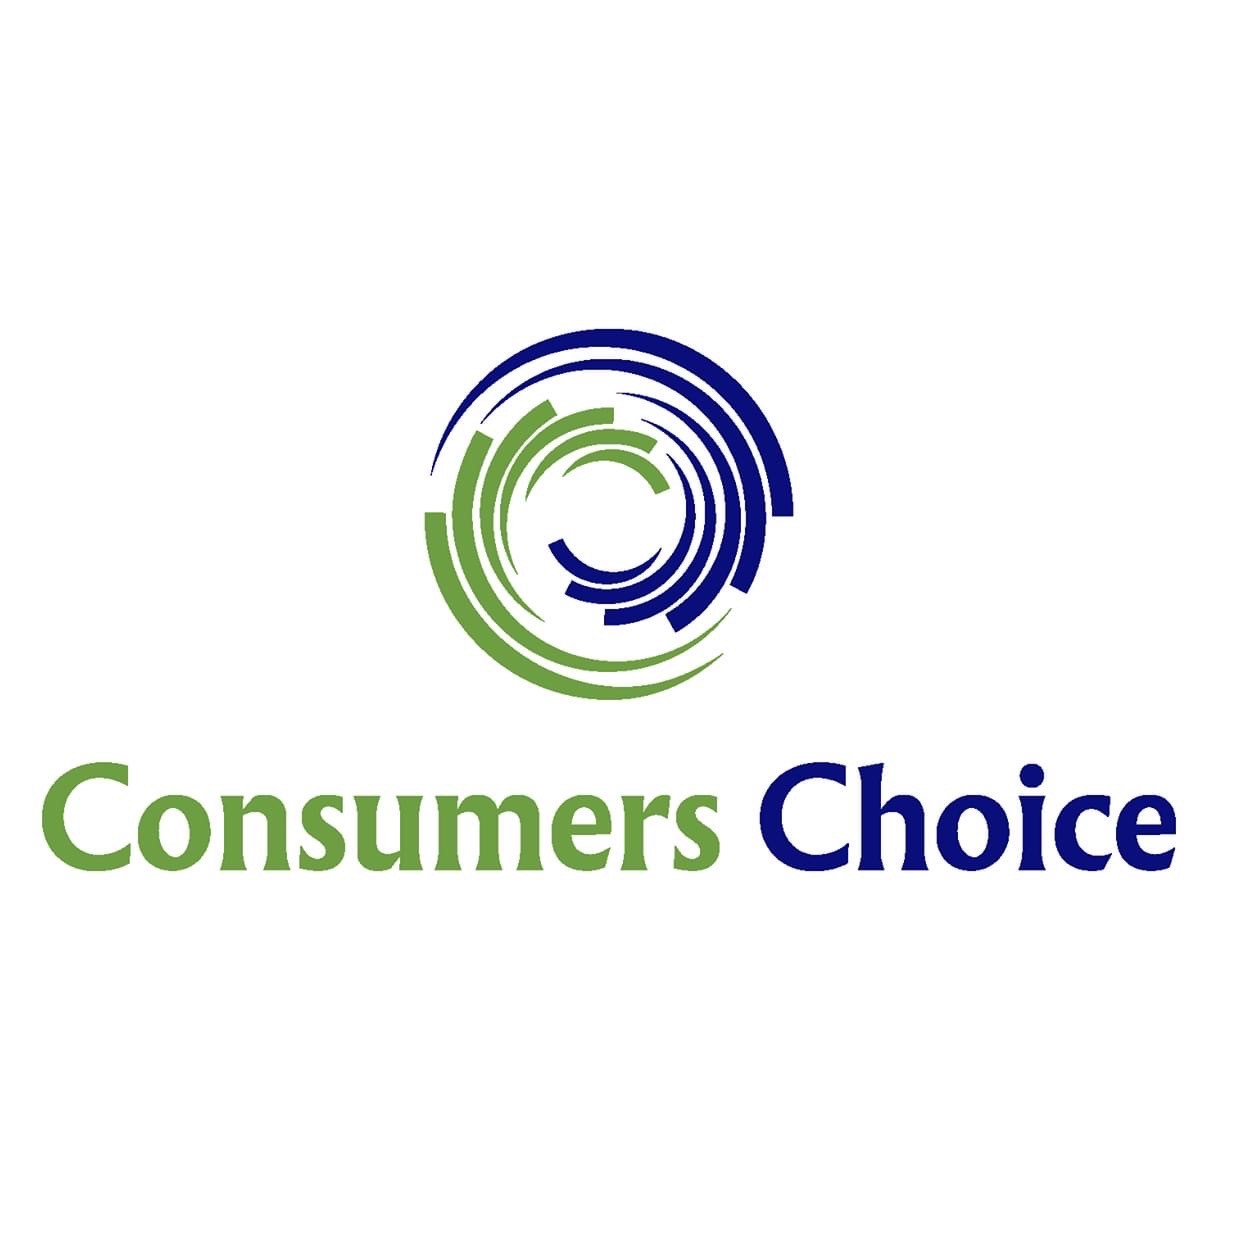 The Consumers Choice 02